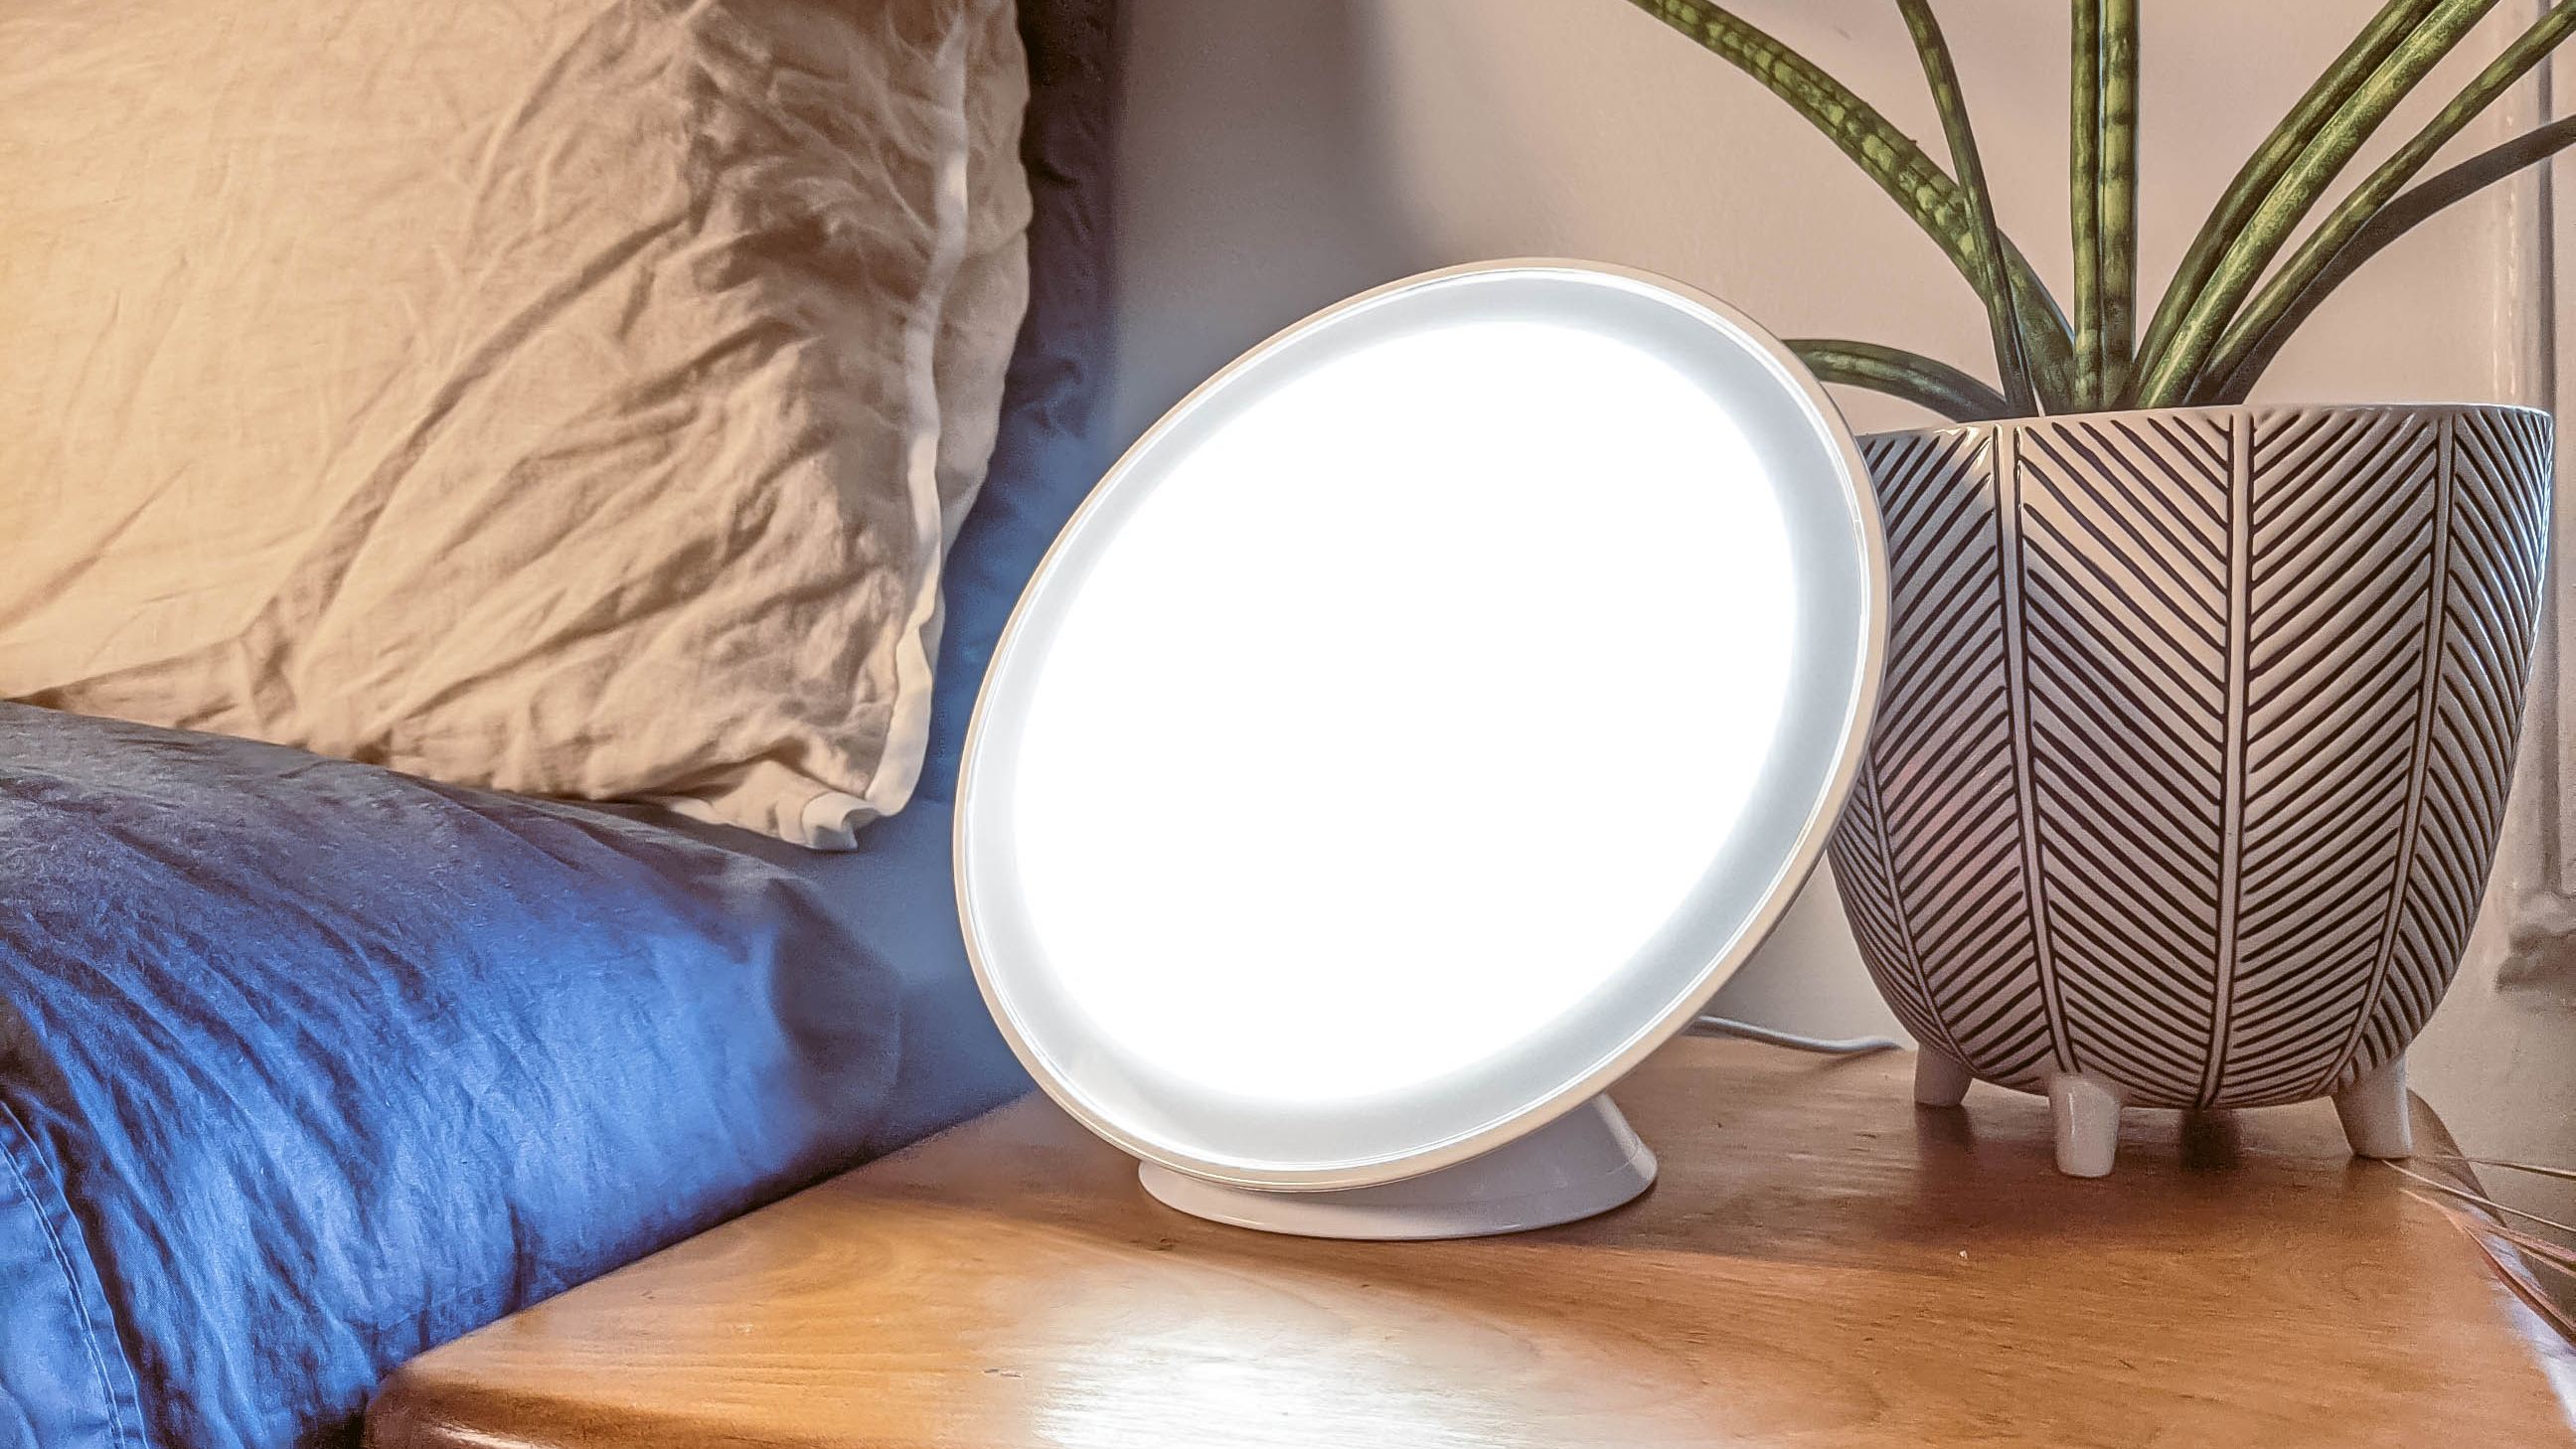 5 light therapy lamps that will brighten your winter - National